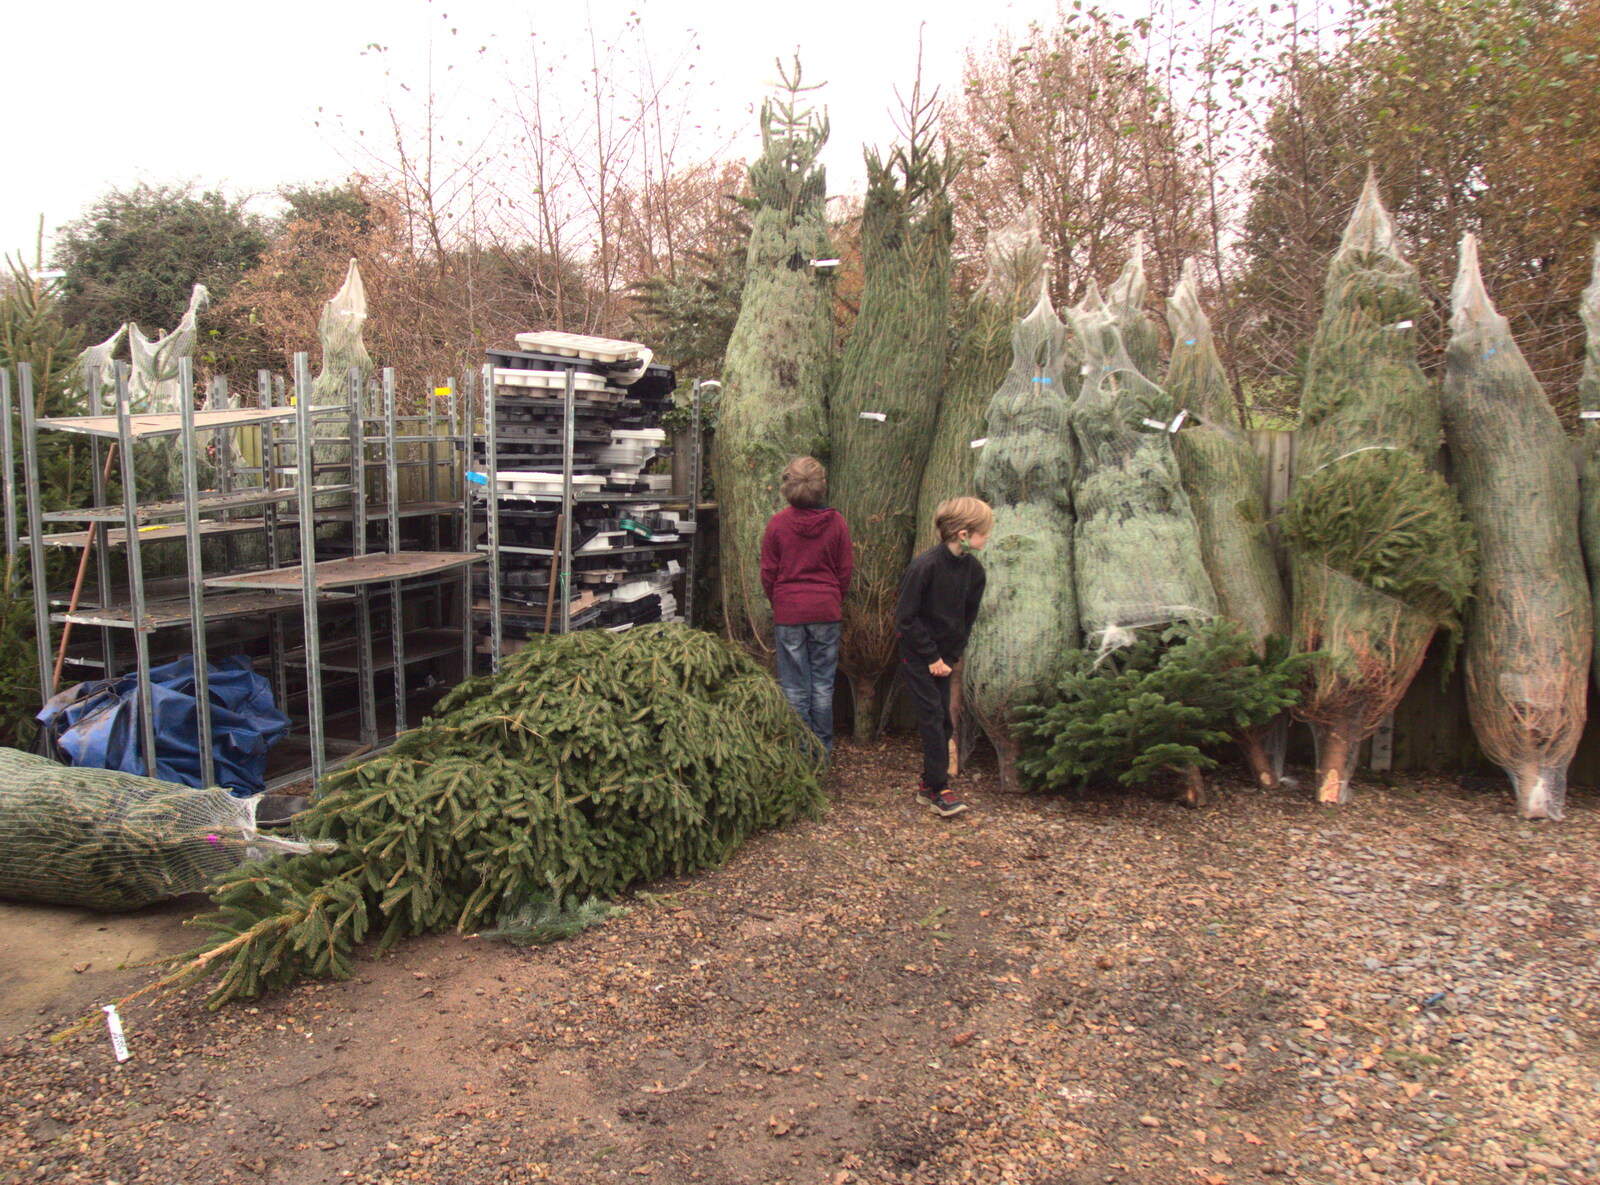 The boys inspect Christmas trees from Frosty Rides and a Christmas Tree, Diss Garden Centre, Diss, Norfolk - 29th November 2020